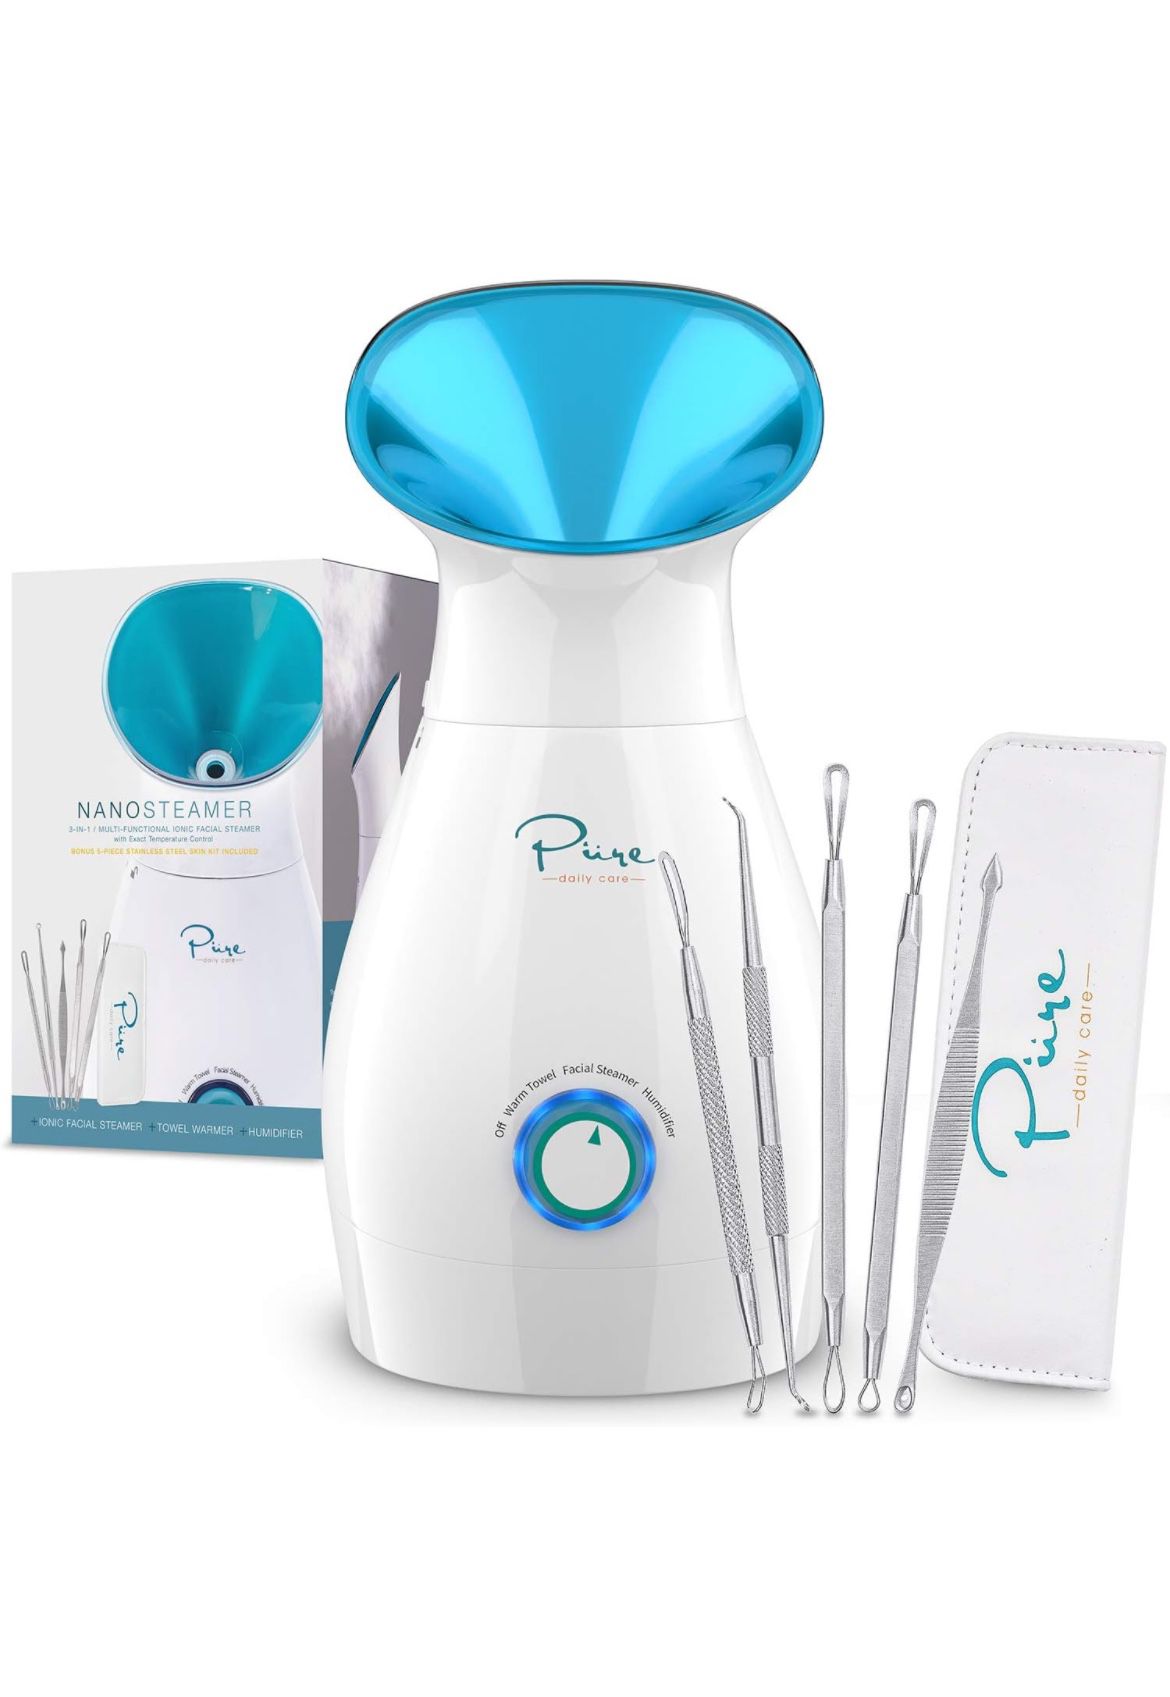 BRAND NEW / Not Opened: NanoSteamer Large 3-in-1 Nano Ionic Facial Steamer with Precise Temp Control - Humidifier - Spa Quality 